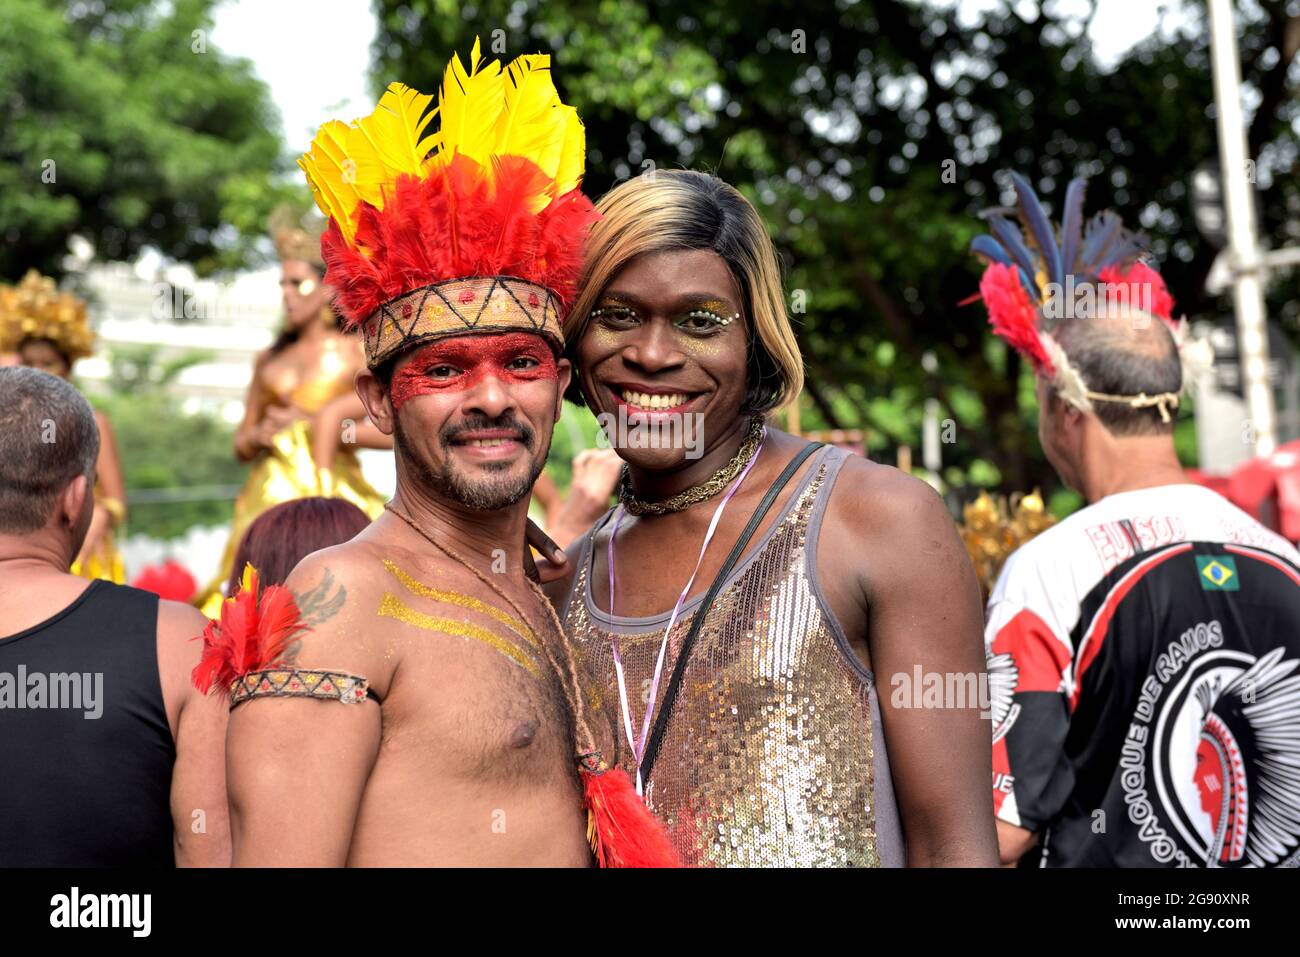 Brazil – February 16, 2020: Happy costumed revelers enjoy the festivities of Carnival in Rio de Janeiro, an event with international tourist interest. Stock Photo